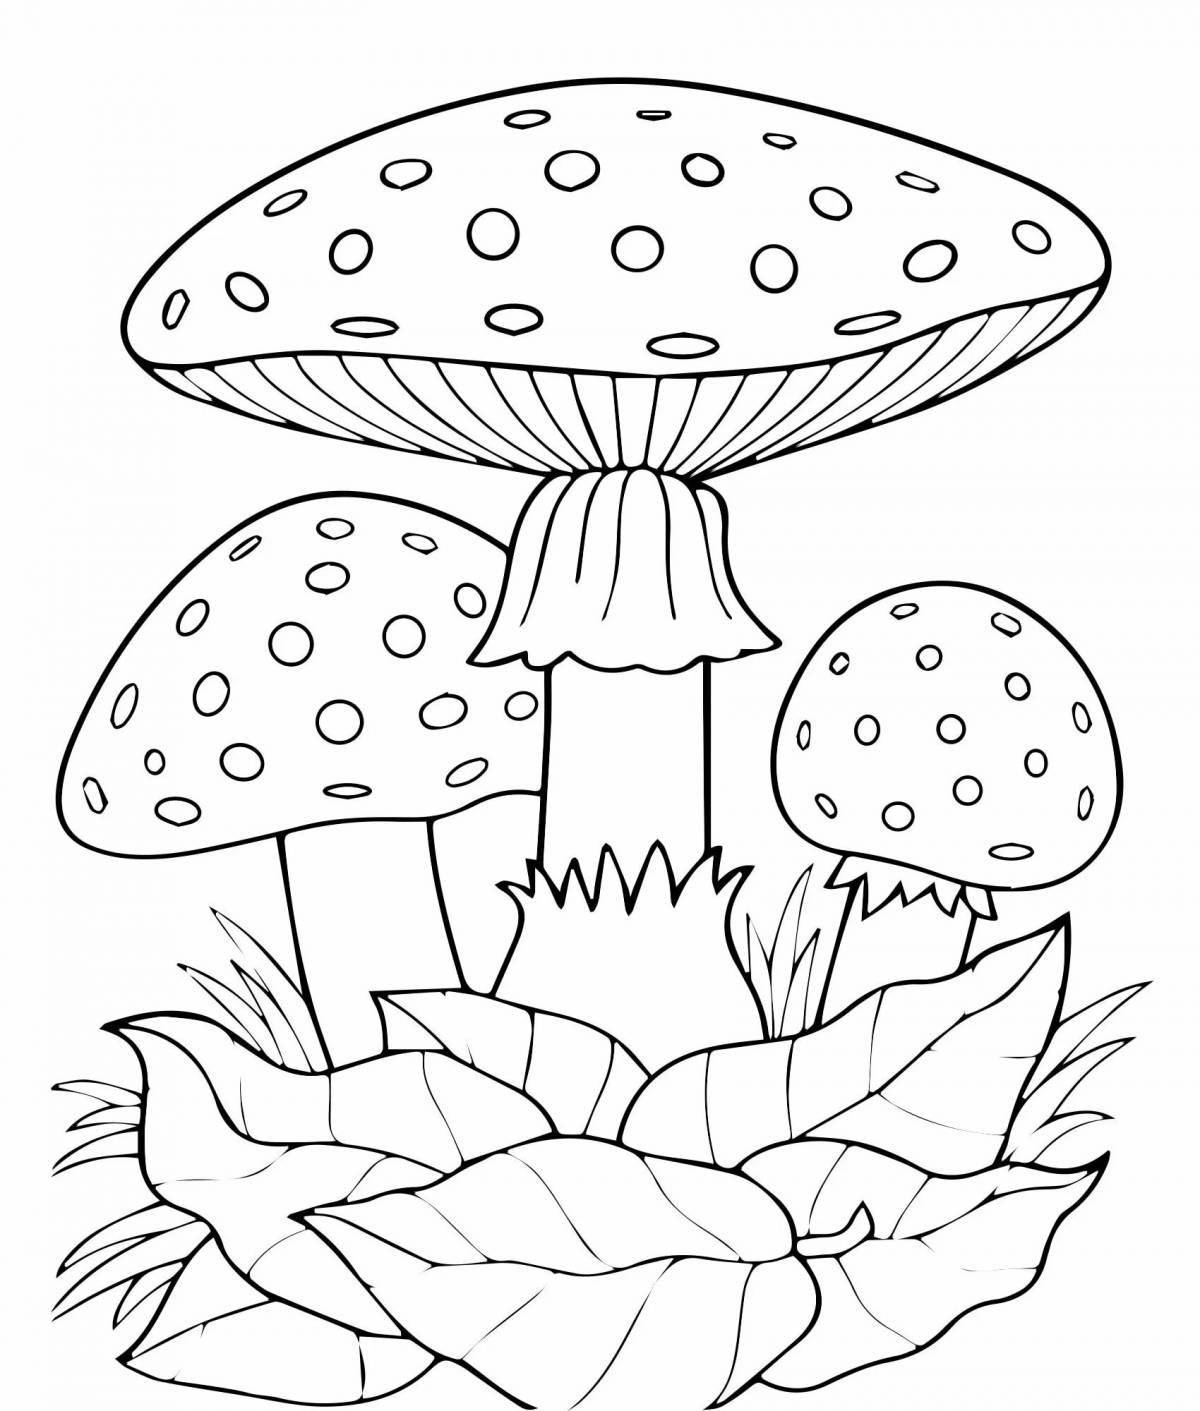 Magic mushroom coloring book for 3-4 year olds